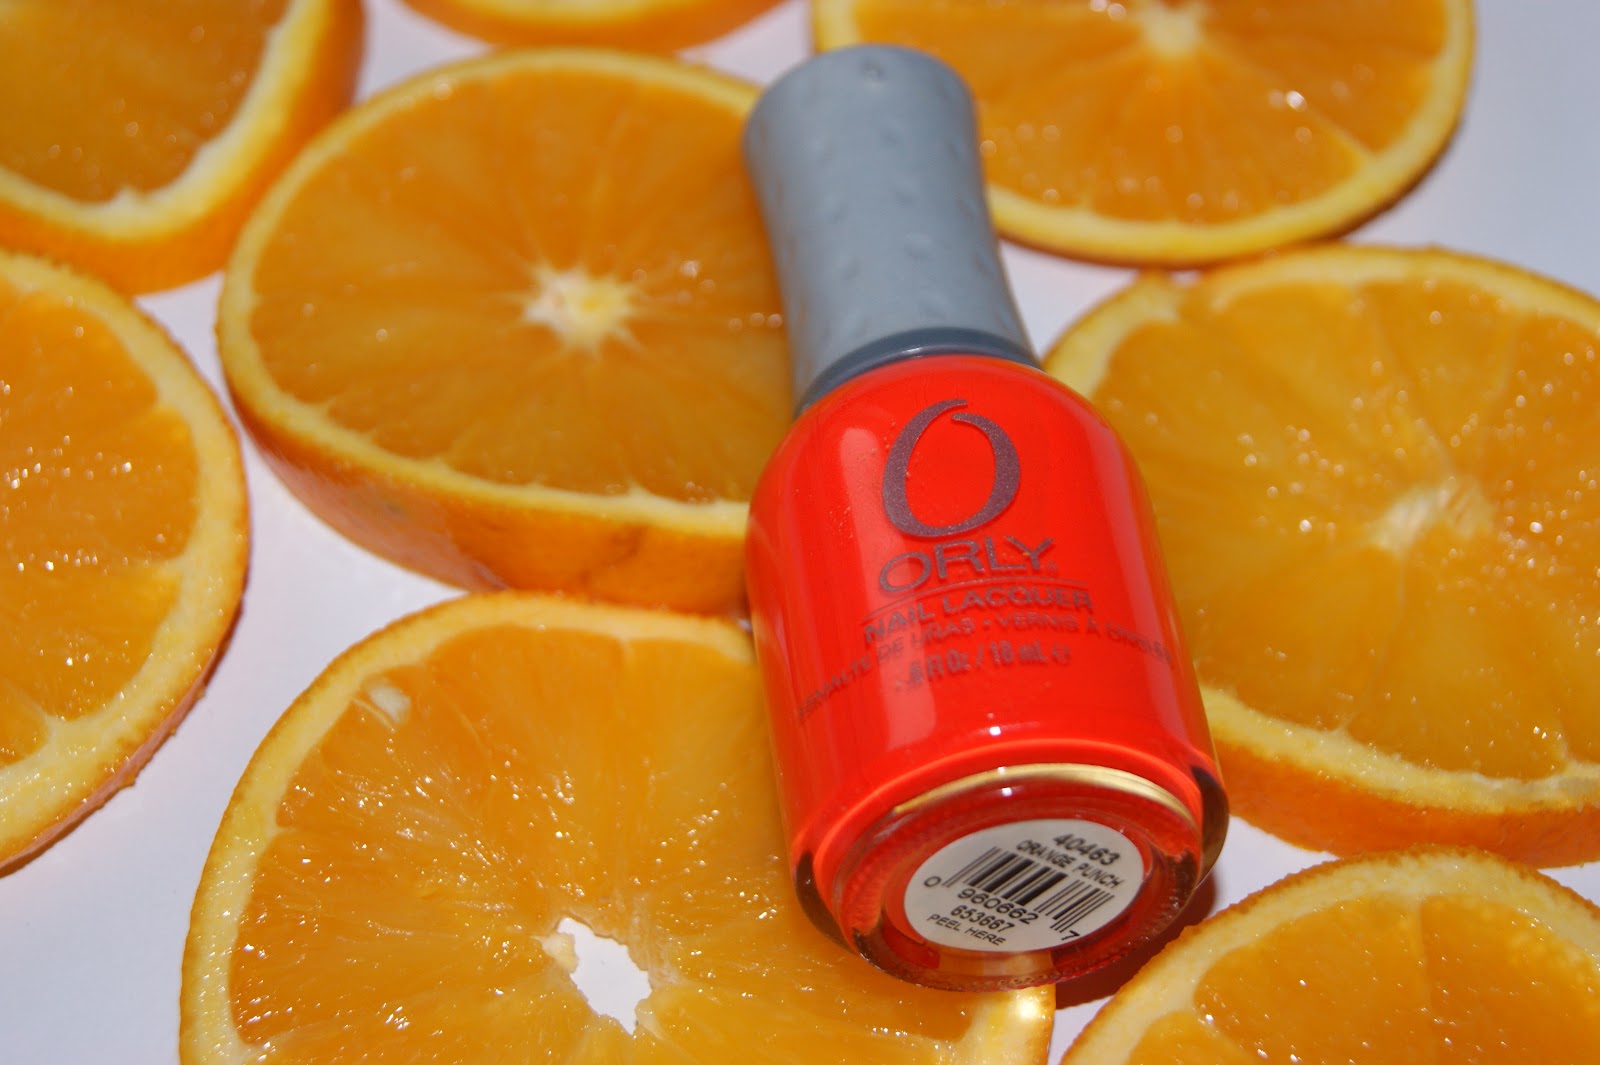 10. Orly Nail Lacquer in "Orange Punch" - wide 1